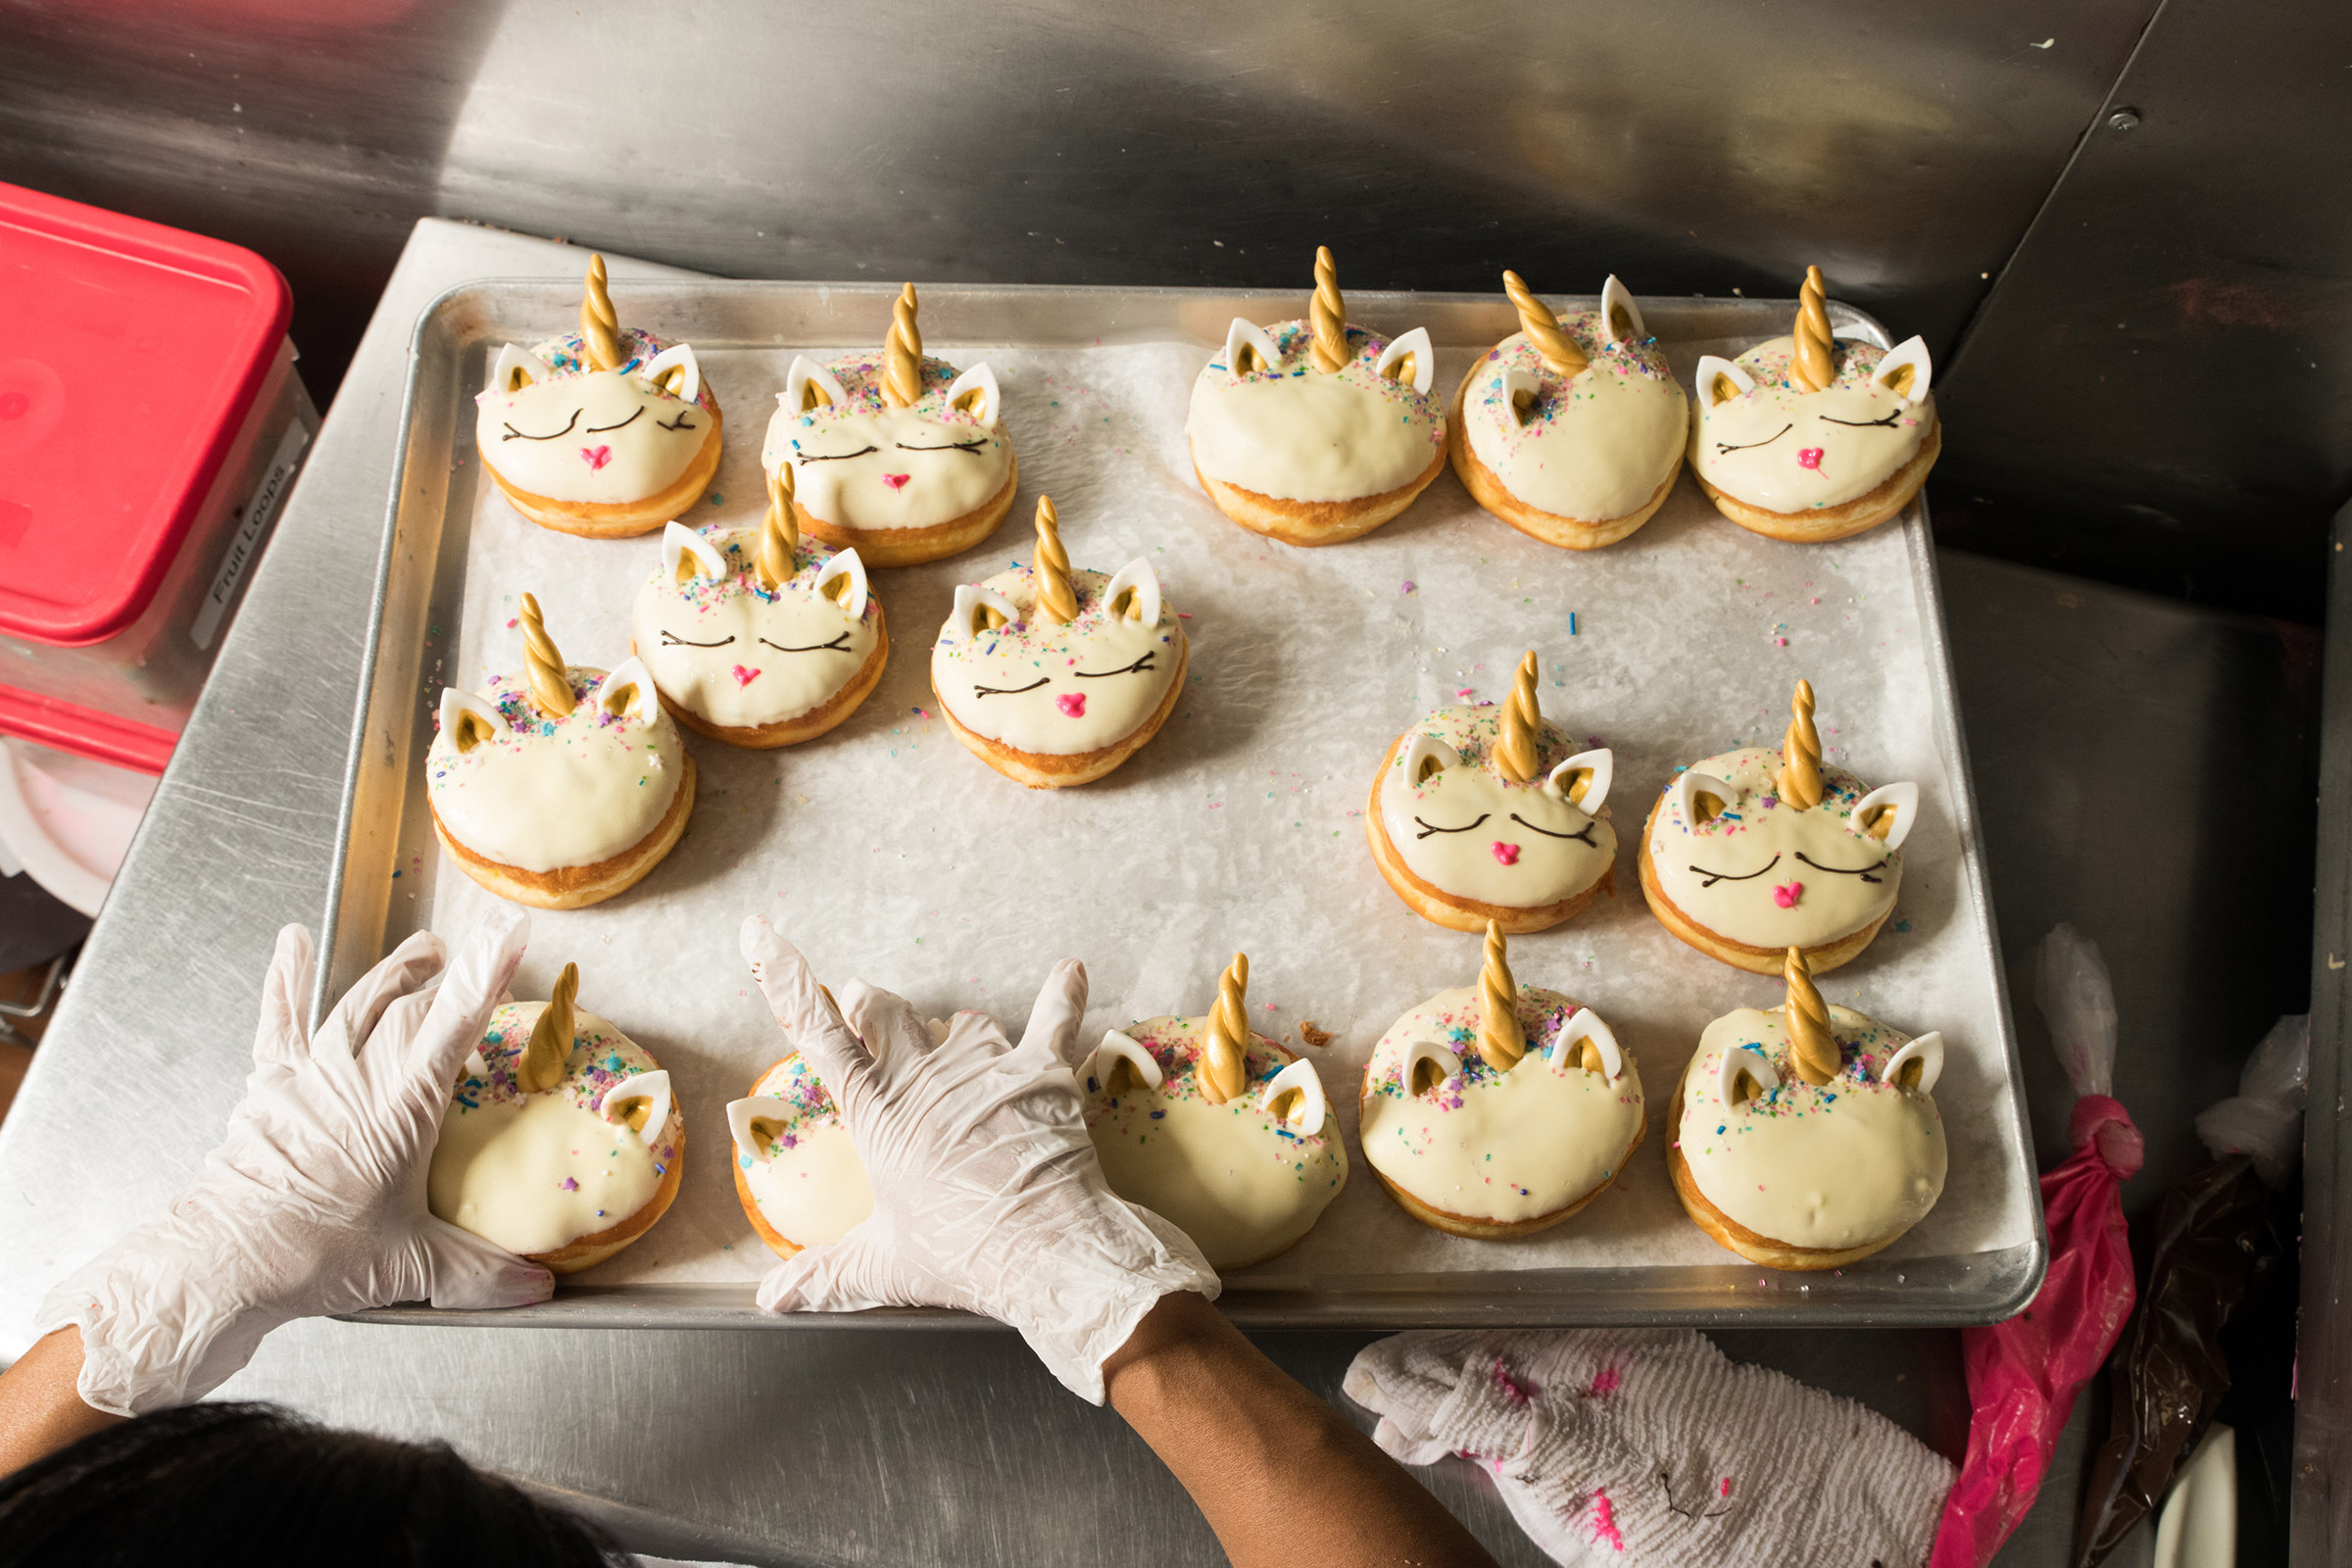 Maria Reyes decorates unicorn doughnuts at California Donuts in Los Angeles on June 6, 2019. (Theo Stroomer for TIME)